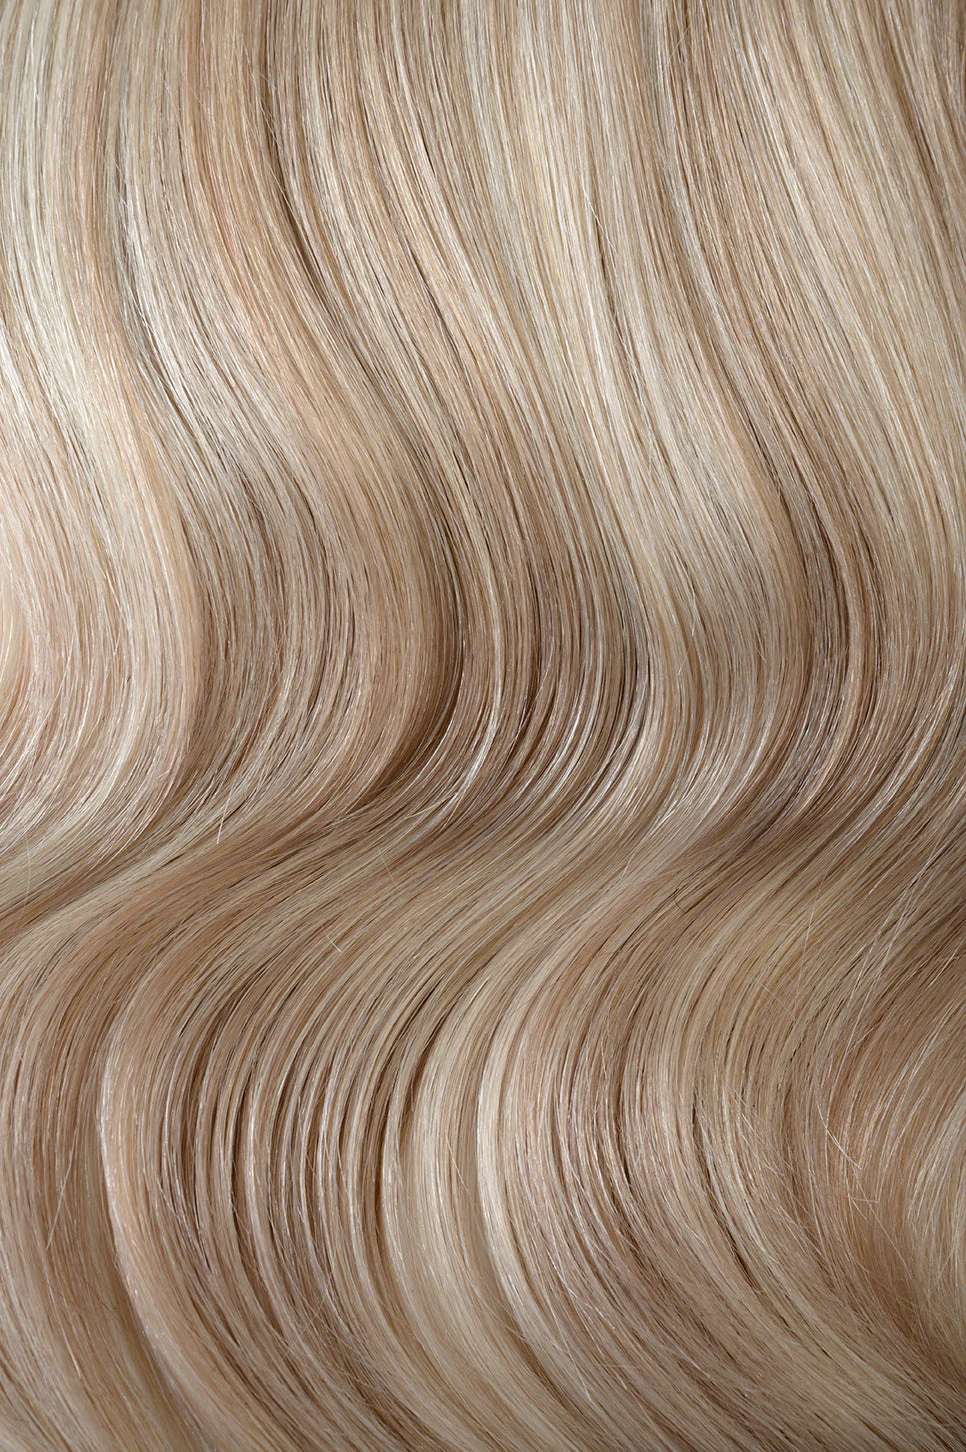 #18/60 Pearl Ash Blonde Highlights Genius Weft Extensions. Superior Hair Extensions.